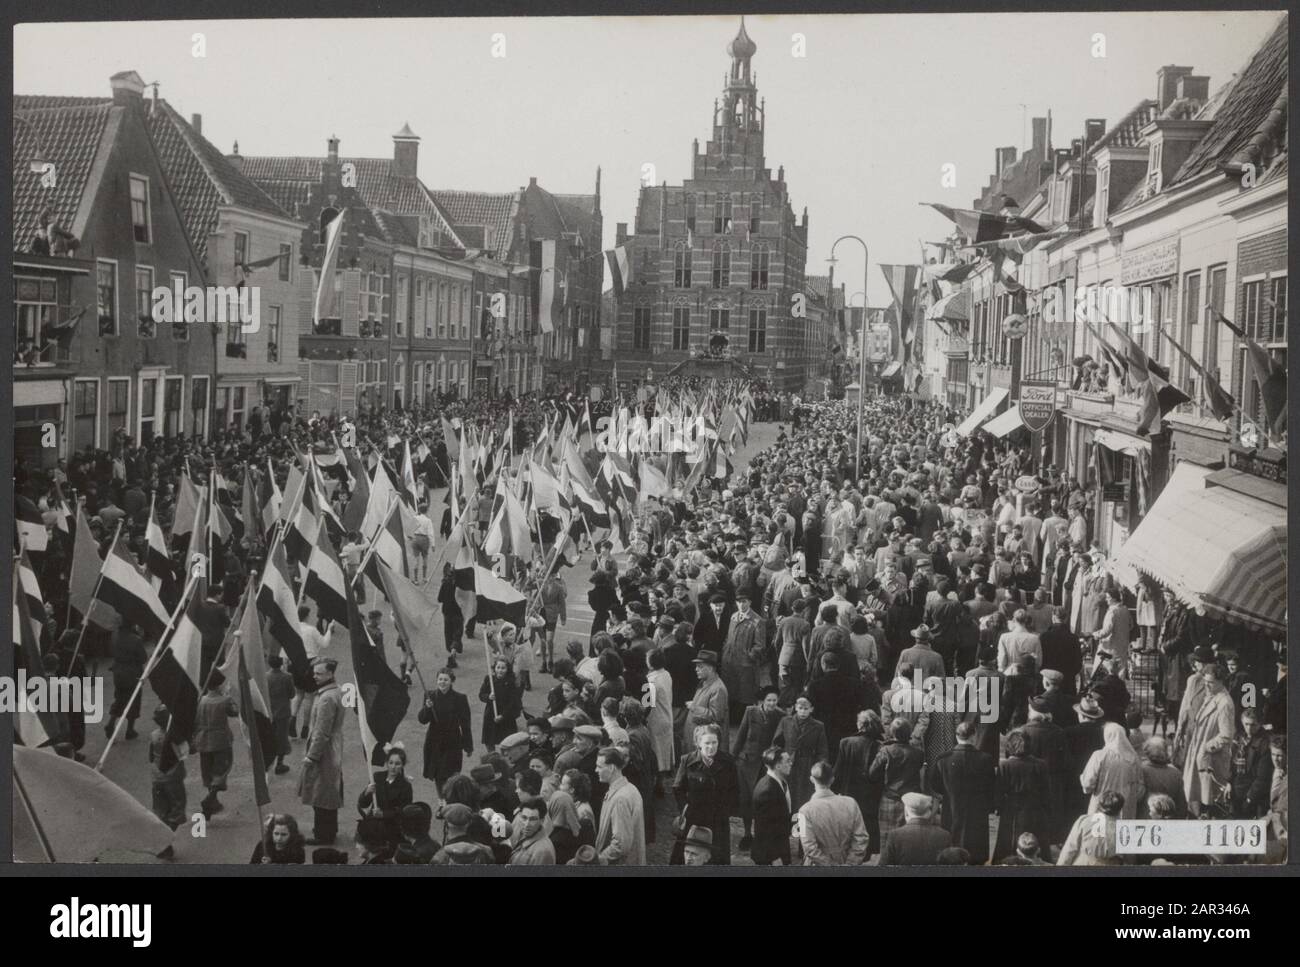 Opening of the Jan van Riebeeck celebrations in Culembor, with a large filé on the Markt with in the background the City Hall of Culemborg. The show was attended by gymnastics clubs, music corps and many flags were carried. Date: 5 april 1952 Location: Culemborg, Gelderland Keywords: festivities, history, parades Stock Photo